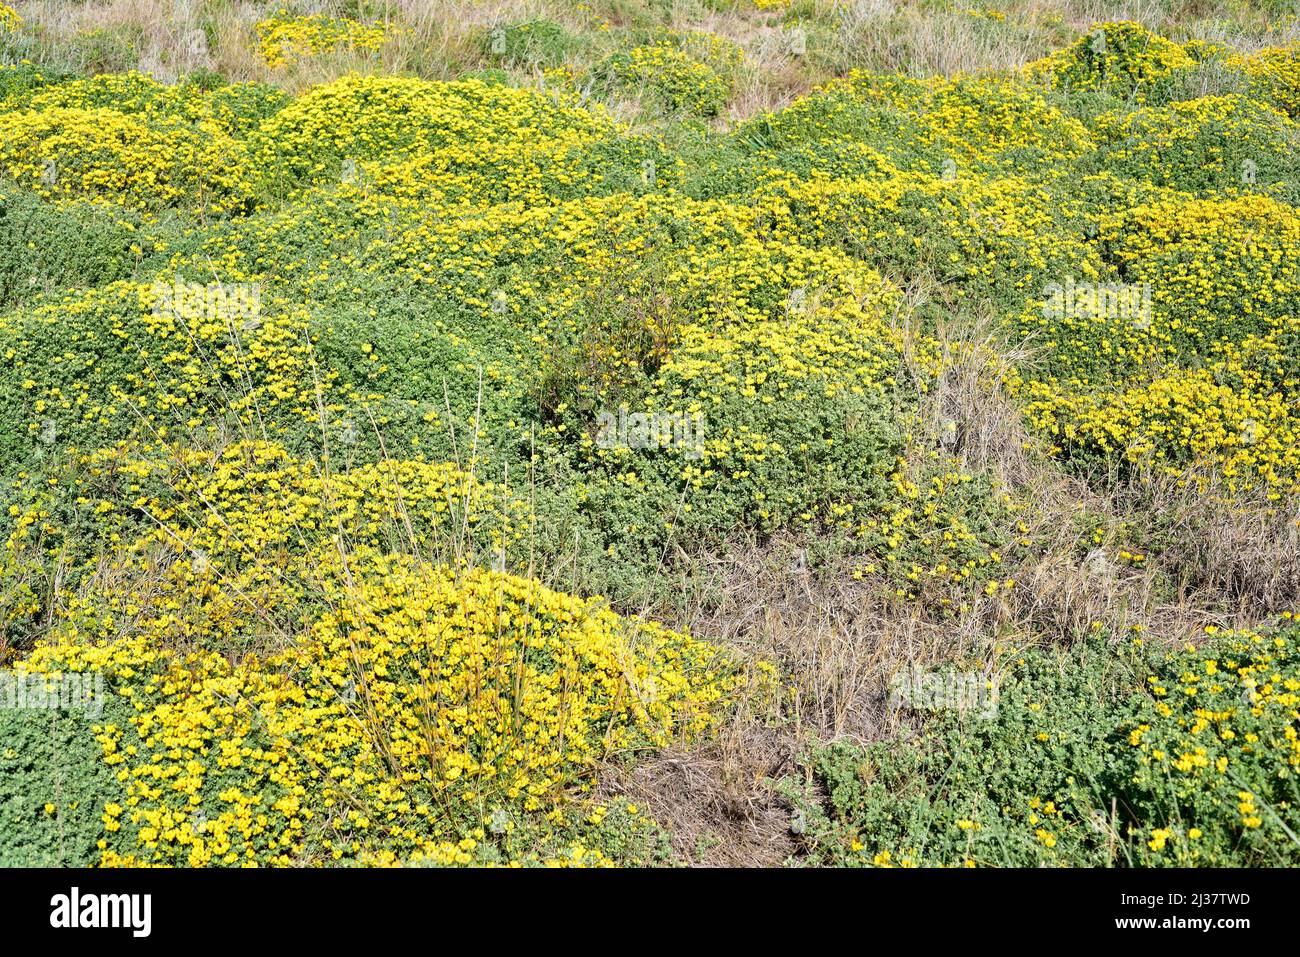 Cretan trefoil (Lotus creticus) is a perennial herb native to coasts of Mediterranean basin. This photo was taken in Castelldefels, Barcelona, Stock Photo